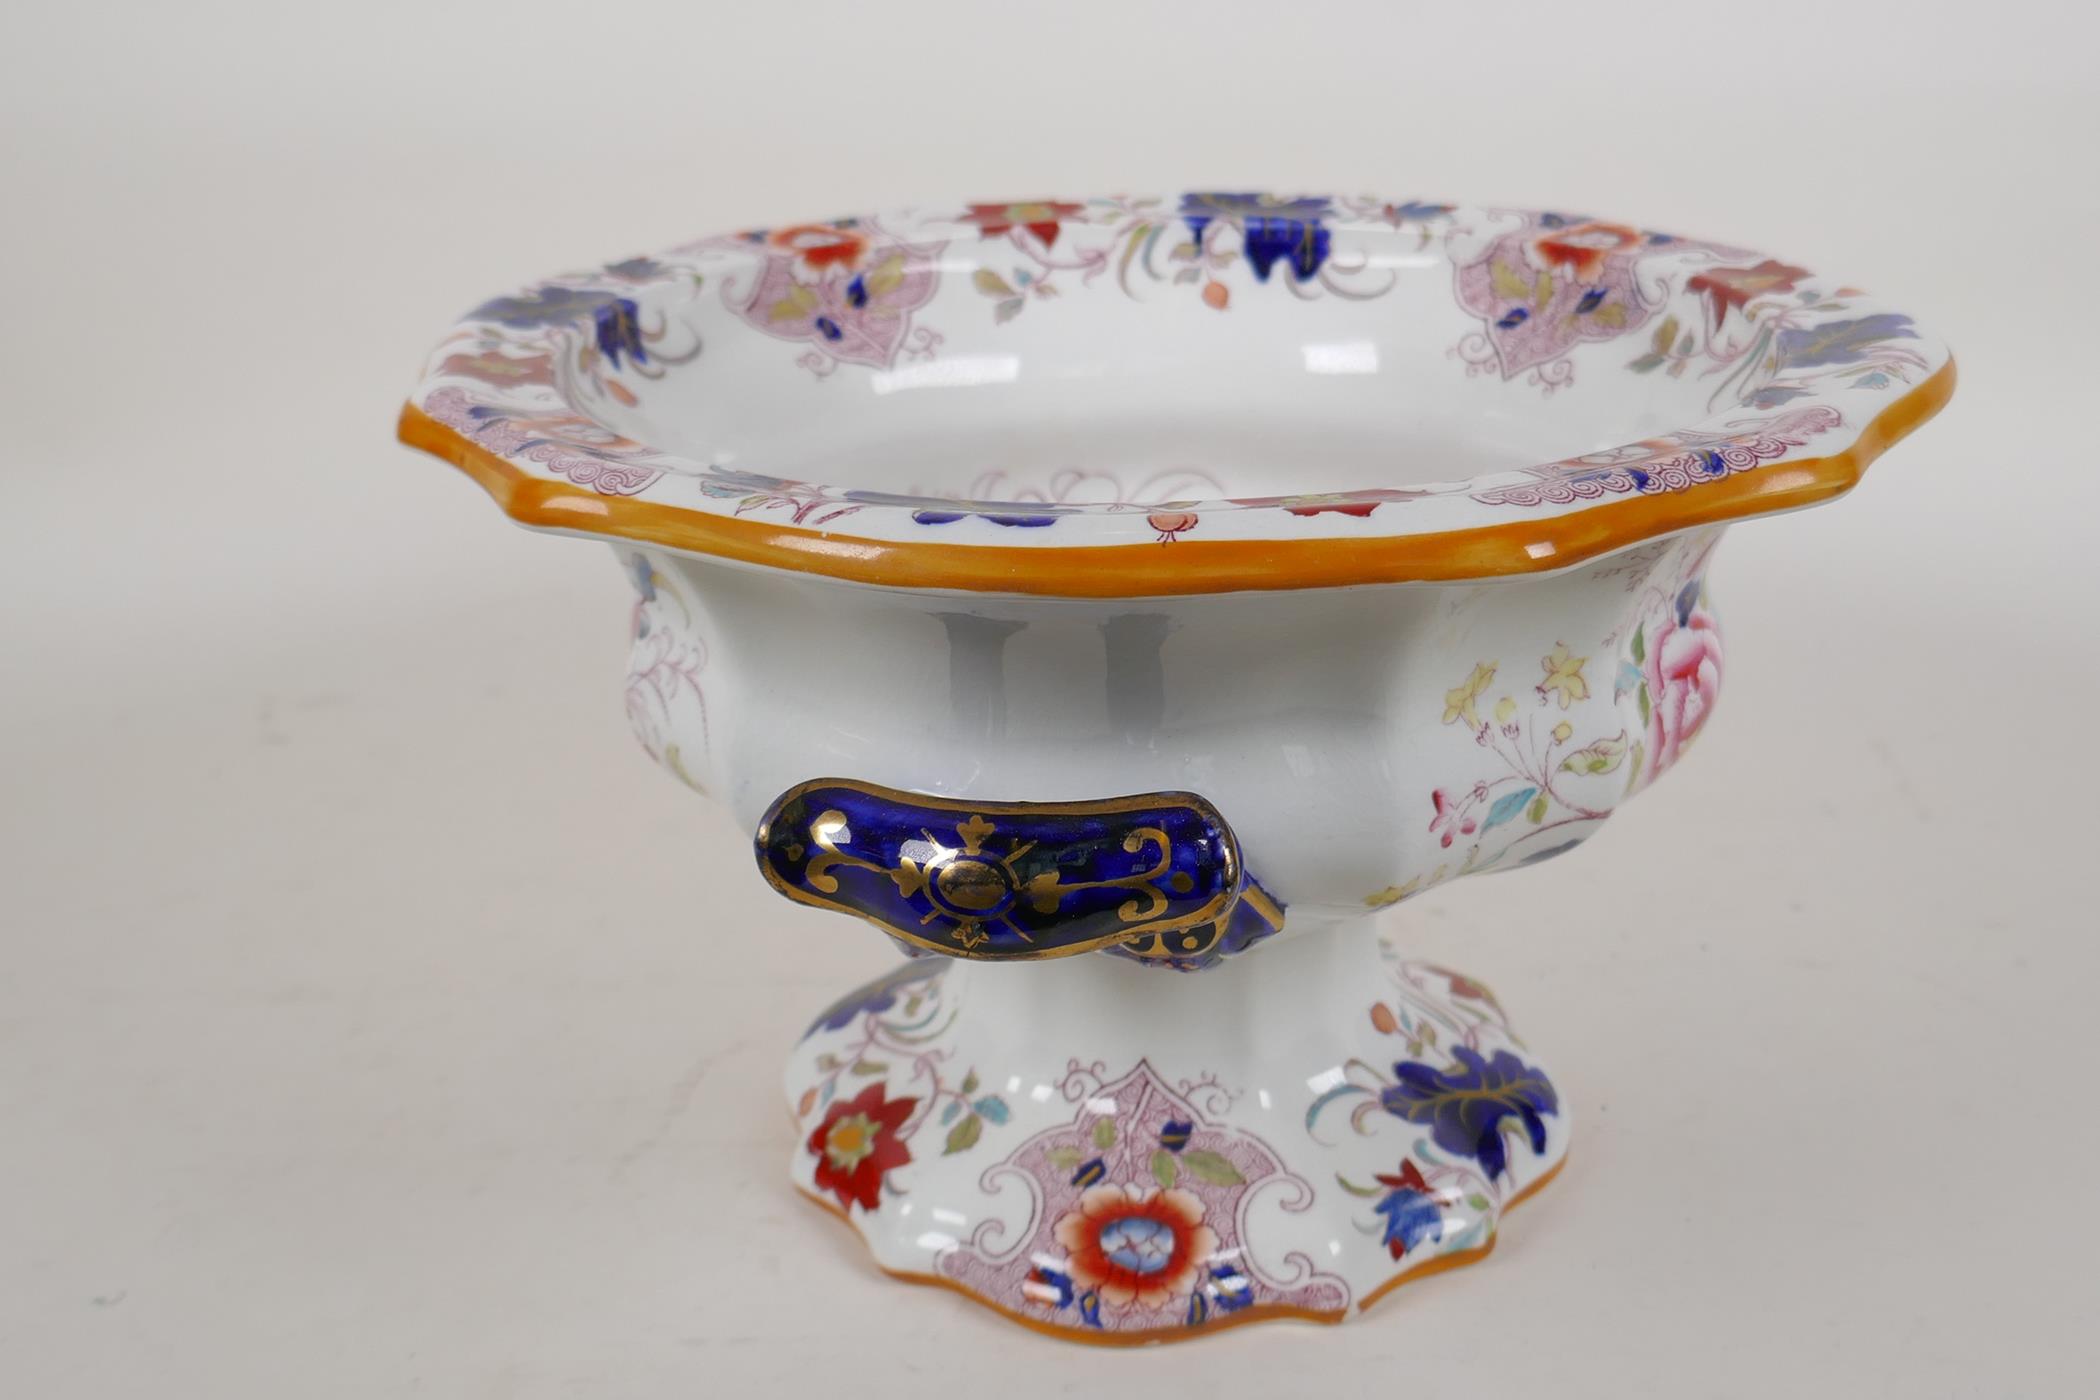 A Masons Ironstone pedestal bowl with two blue and gilt handles and overall floral decoration, 7" - Image 2 of 4